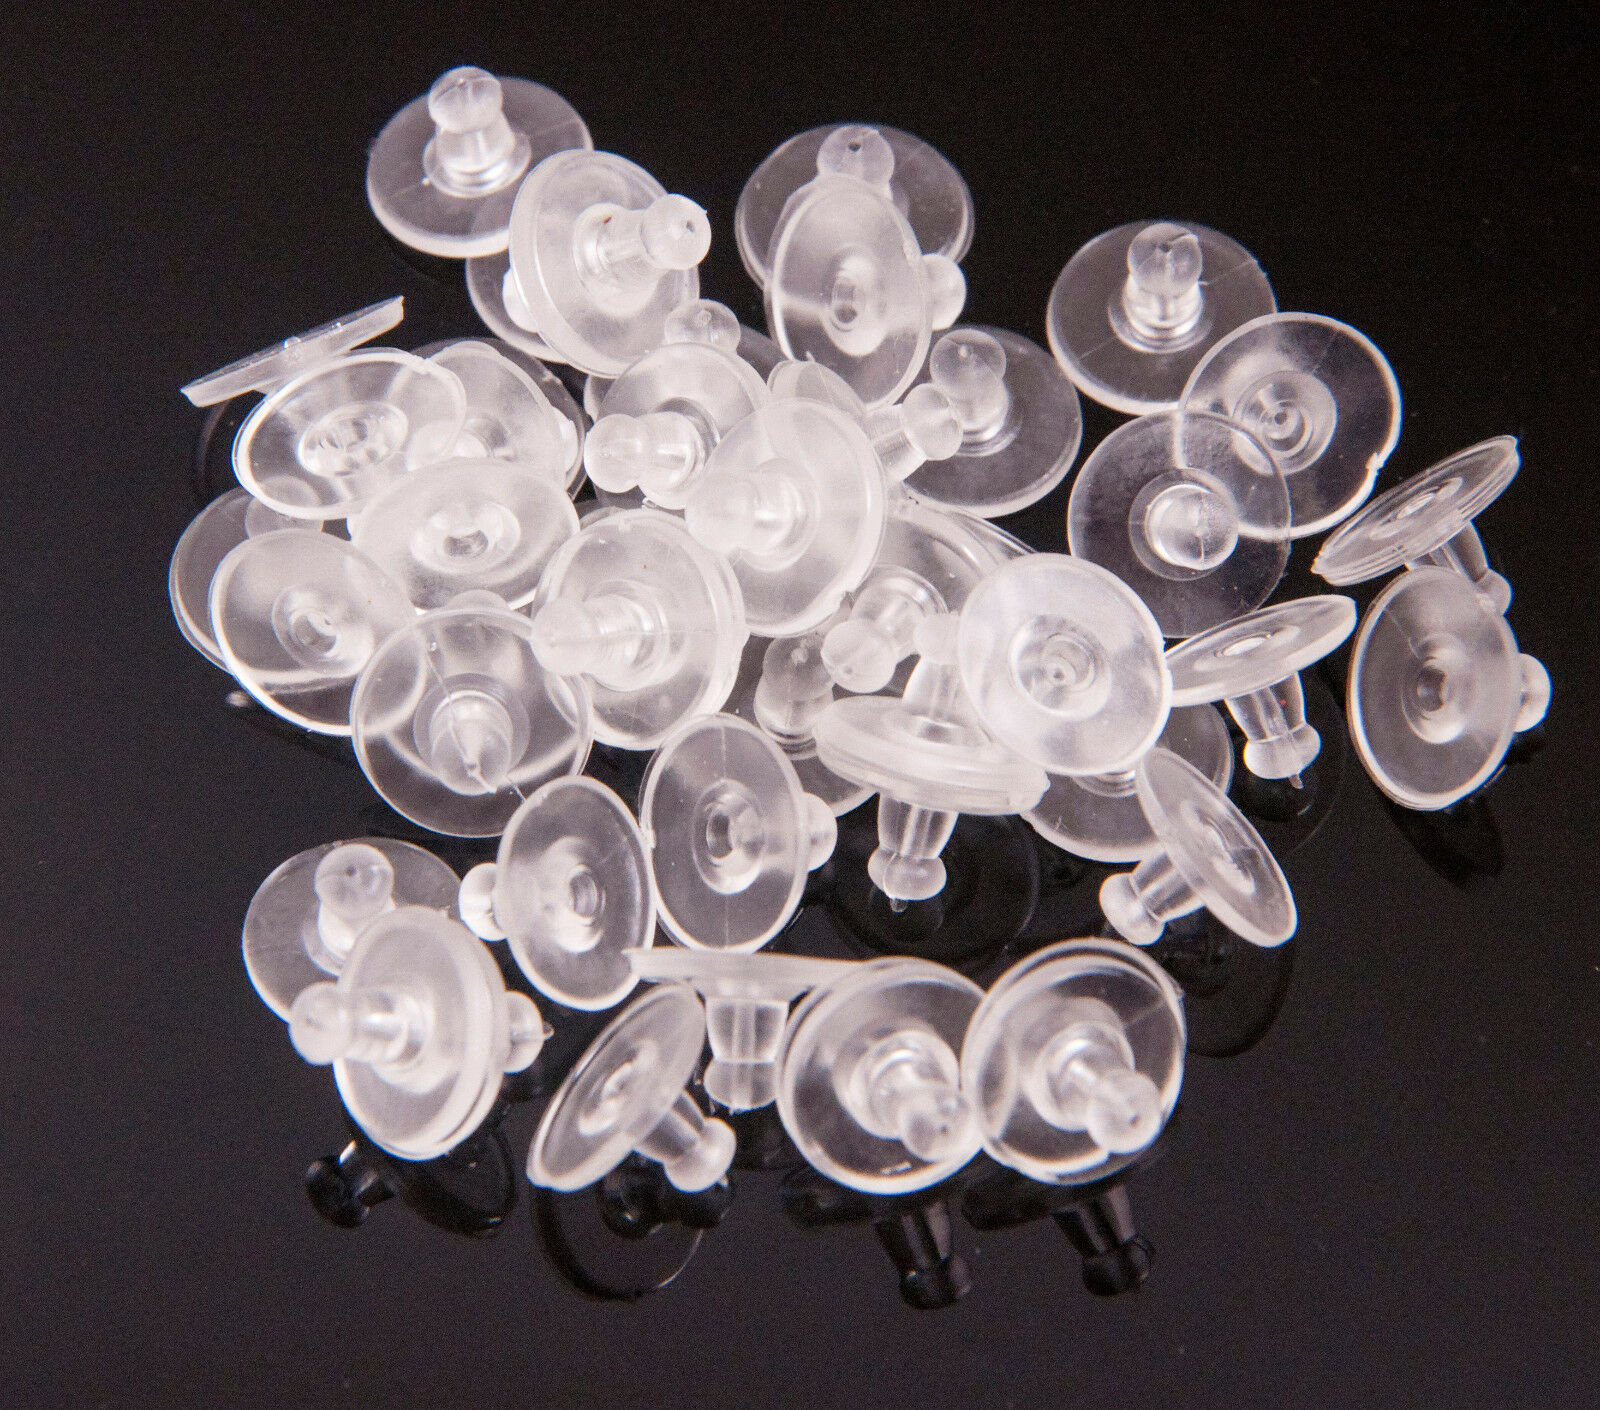 50 Pcs 11mm Clear Silicone Pierced Earring Cushions Back Pads Stoppers